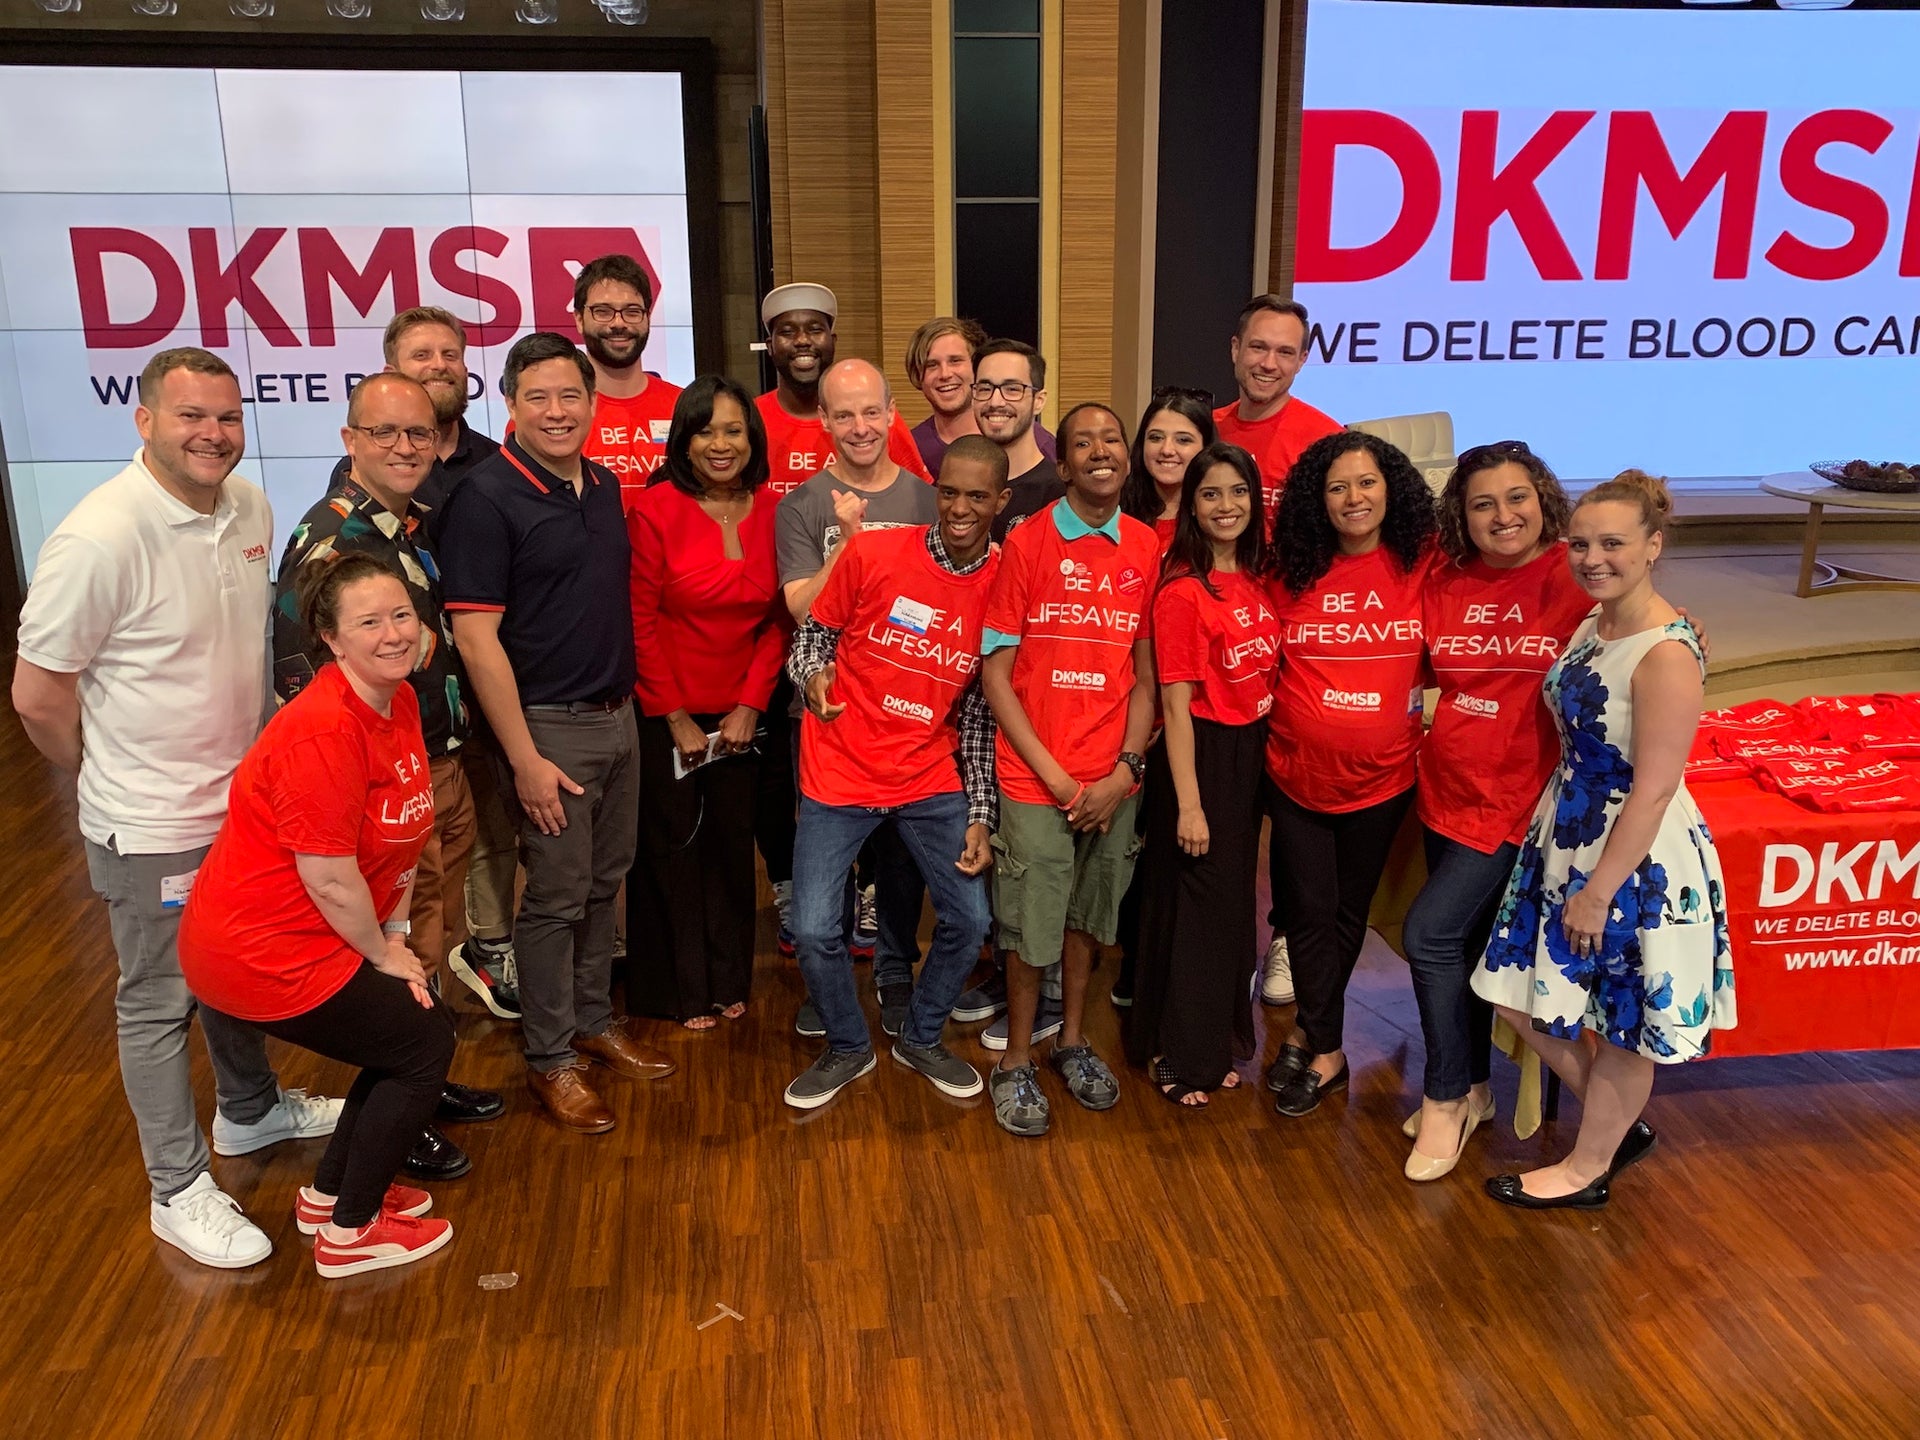 DKMS team and ABC7NY 